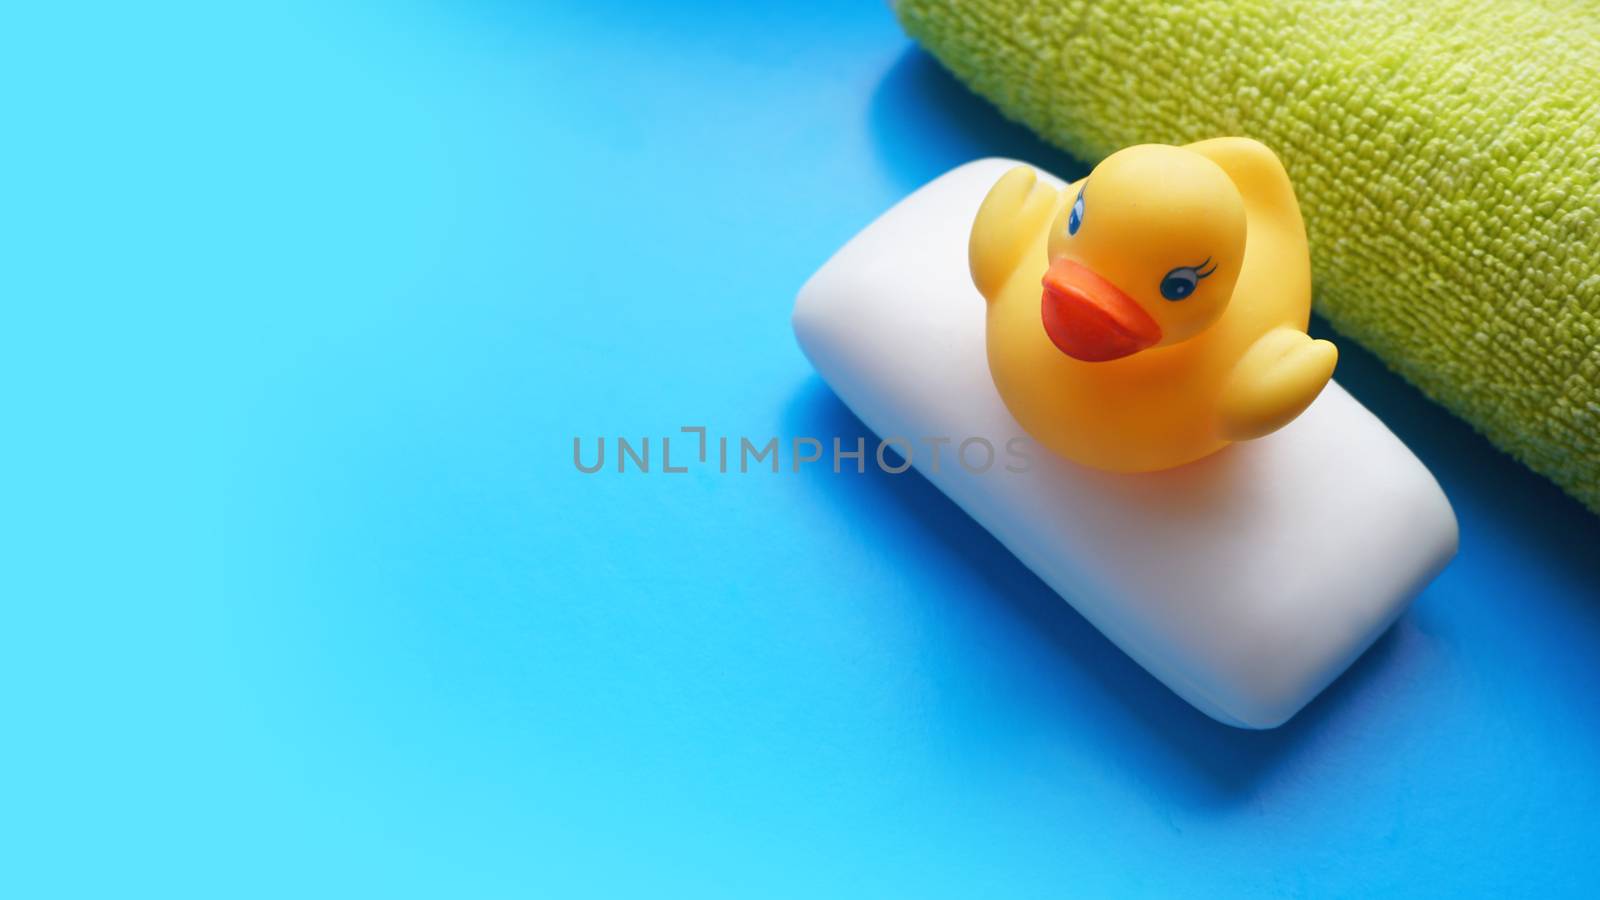 Terry towel, soap and yellow toy duck on a blue background. Flat lay photo, top view